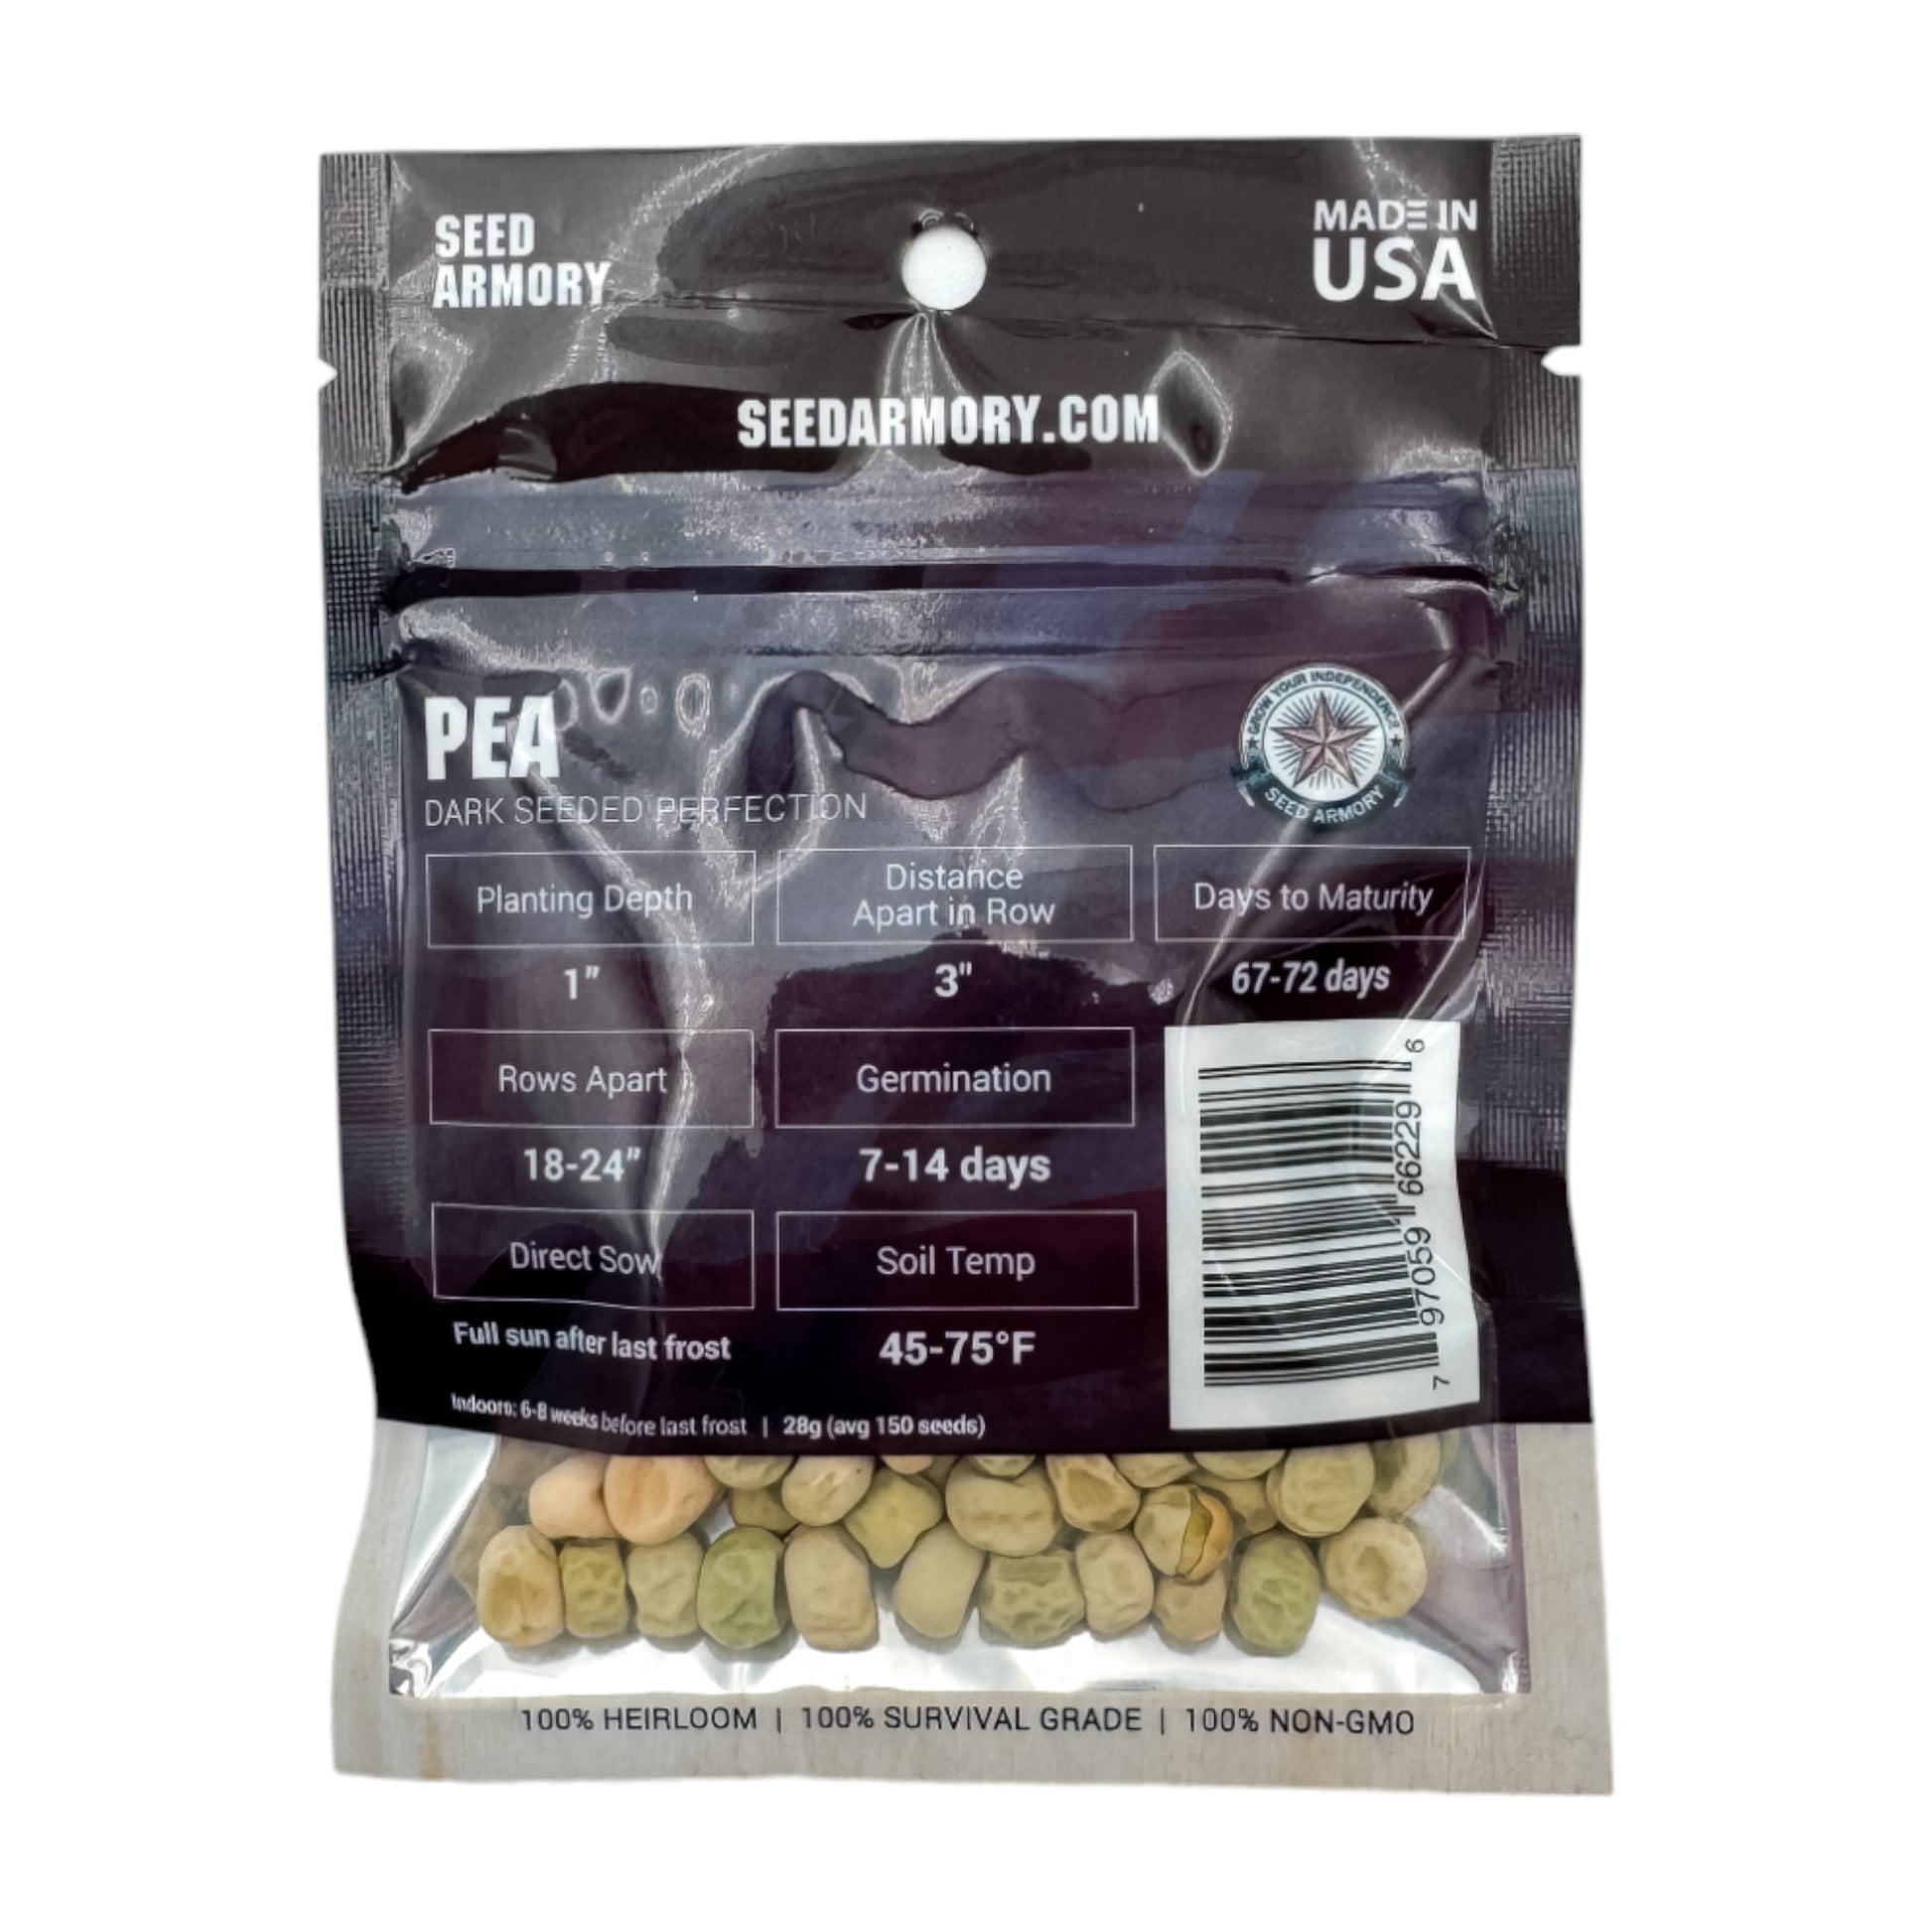 Reverse packet of Heirloom 'Dark Seeded Perfection' pea seeds with planting instructions